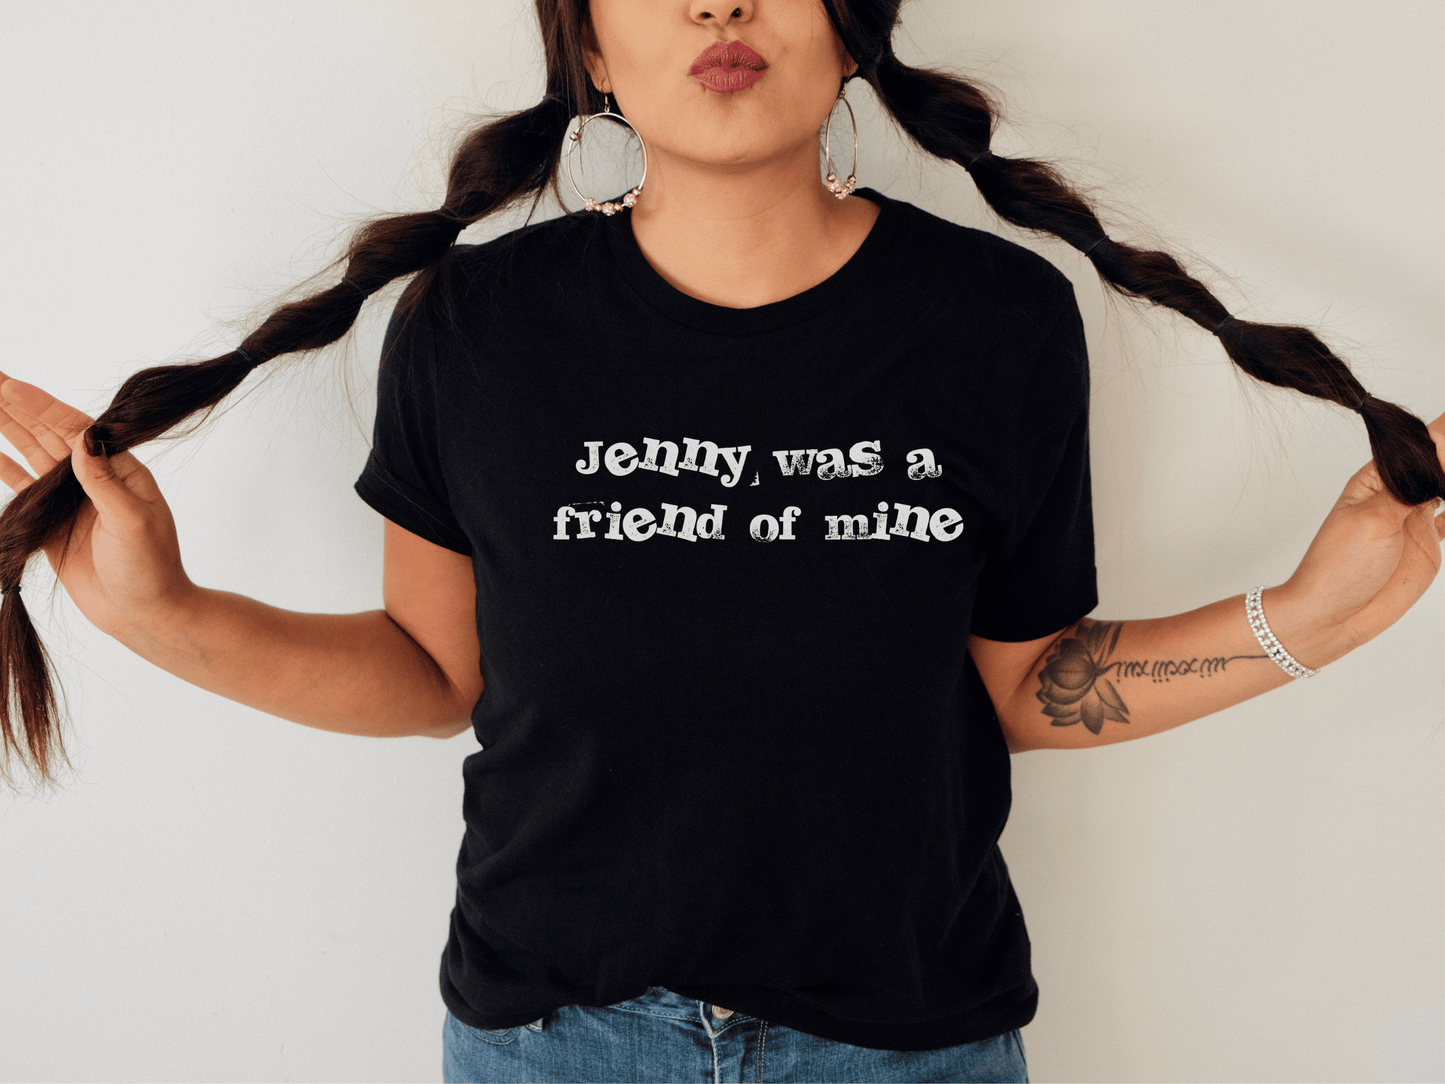 The Killers "Jenny was a Friend of Mine" T-Shirt in Black on a female